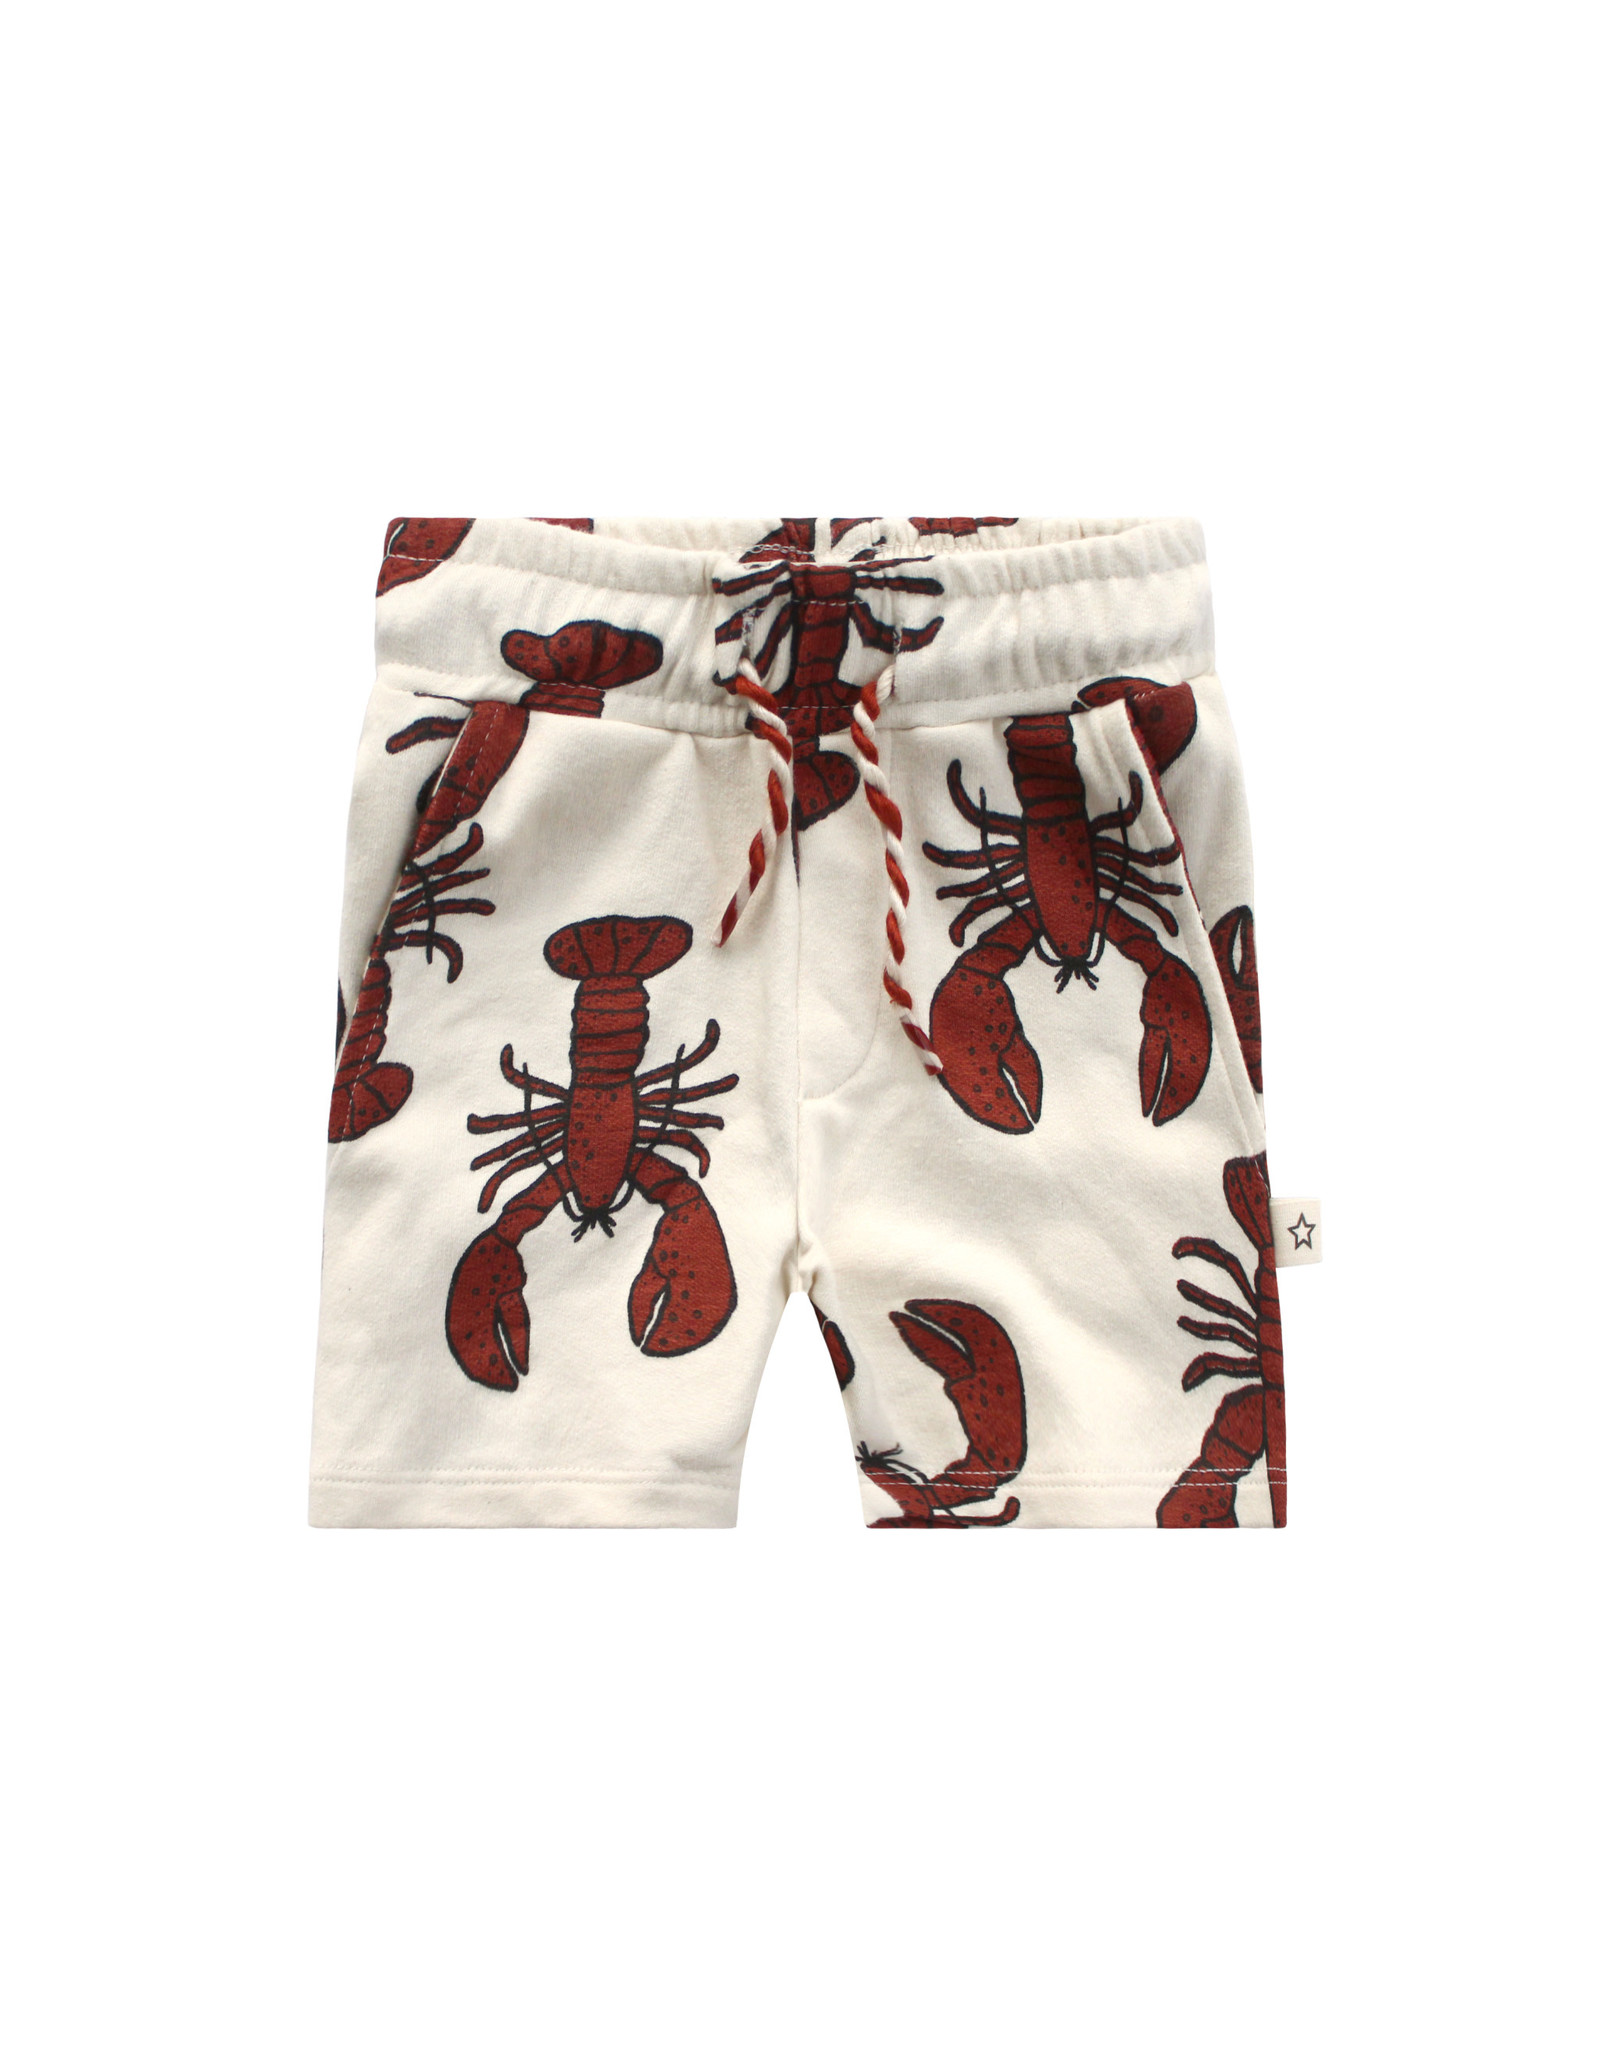 Your Wishes Lobster | Long Short Dark Rust